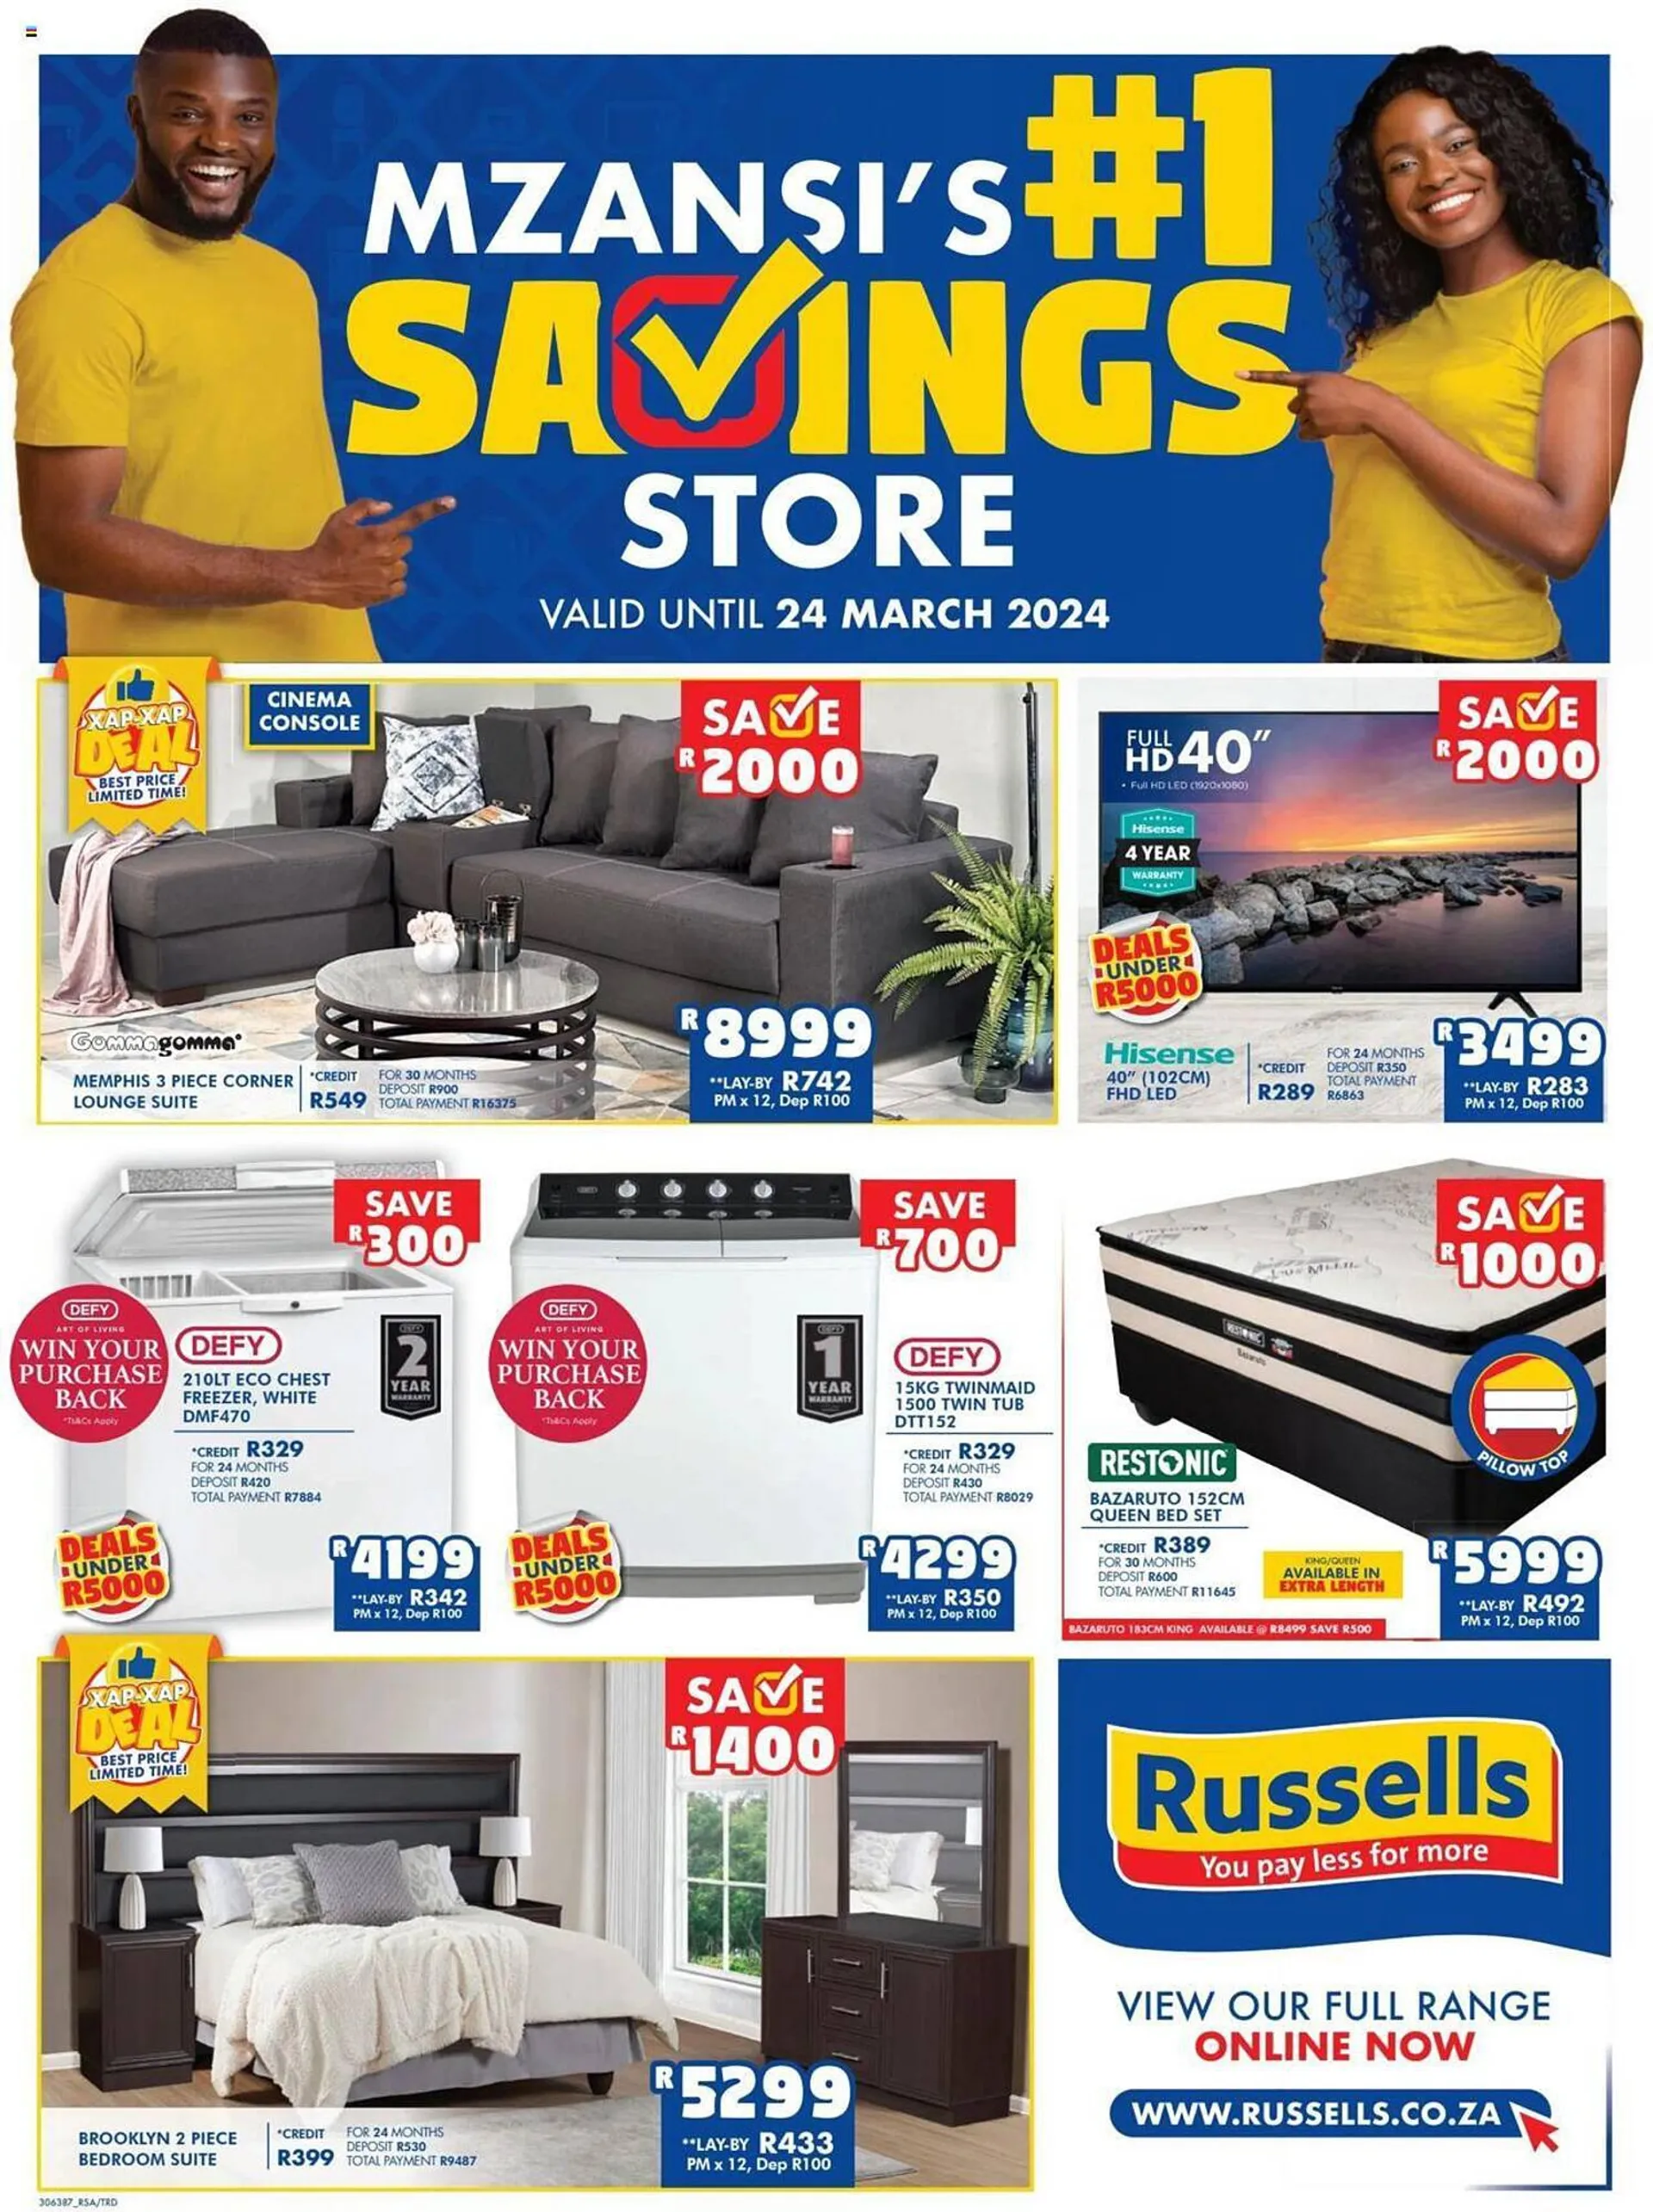 Russells catalogue - 11 March 24 March 2024 - Page 1